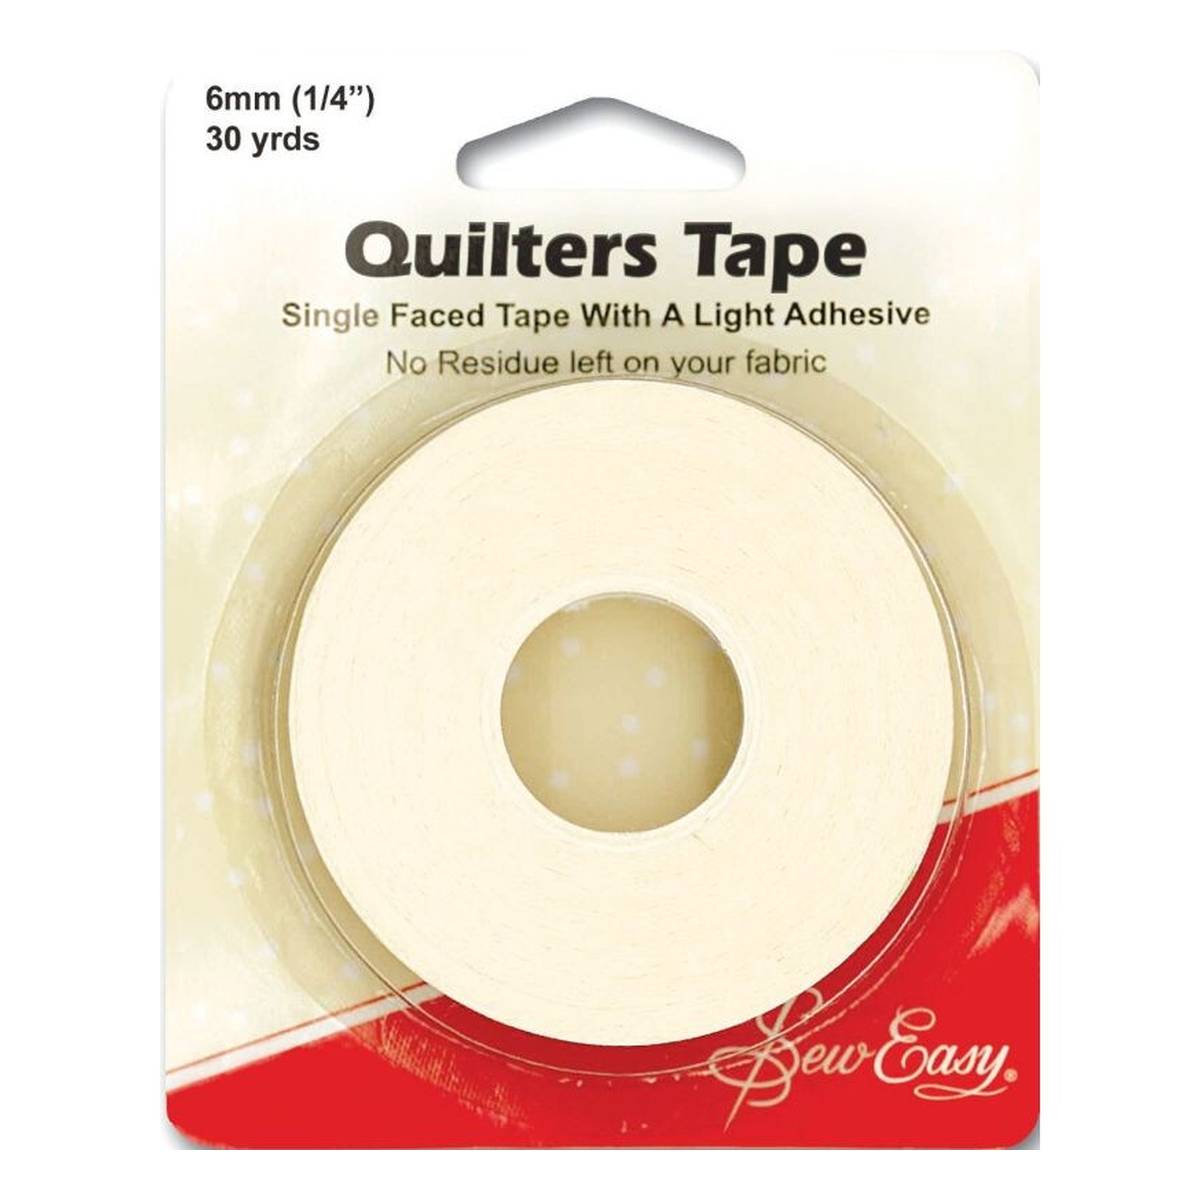 Sew Easy Quilters Tape | Hobbycraft